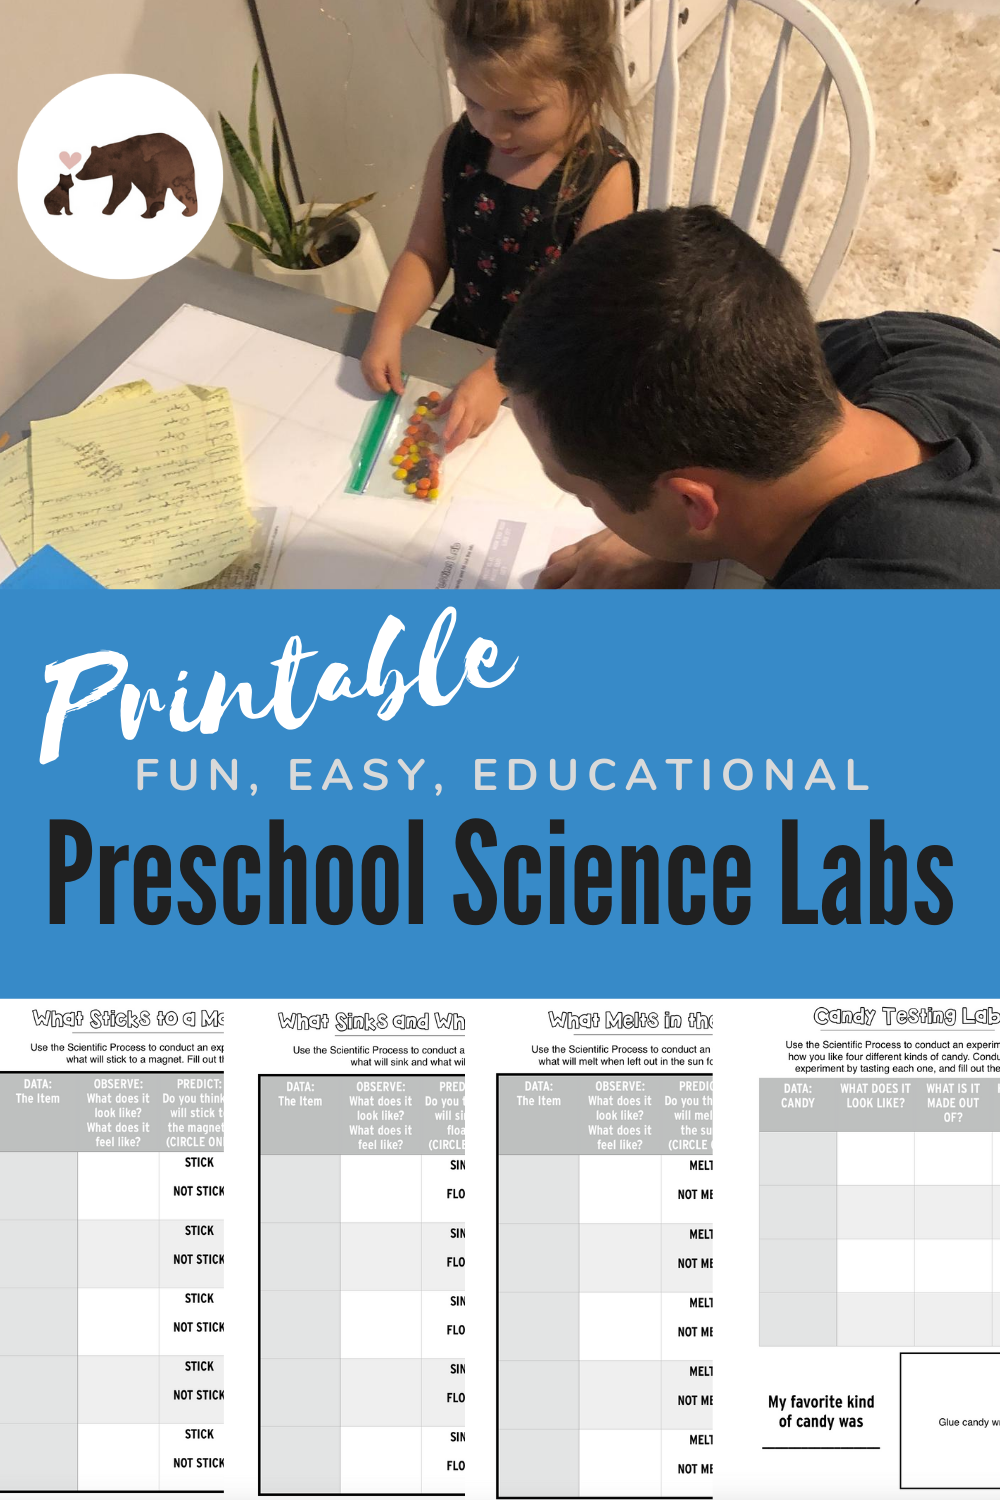 Easy to use printable lab report templates for preschool and kindergarten students - print, experiment, then record! Practice using the scientific method with these fun, easy to follow experiments!